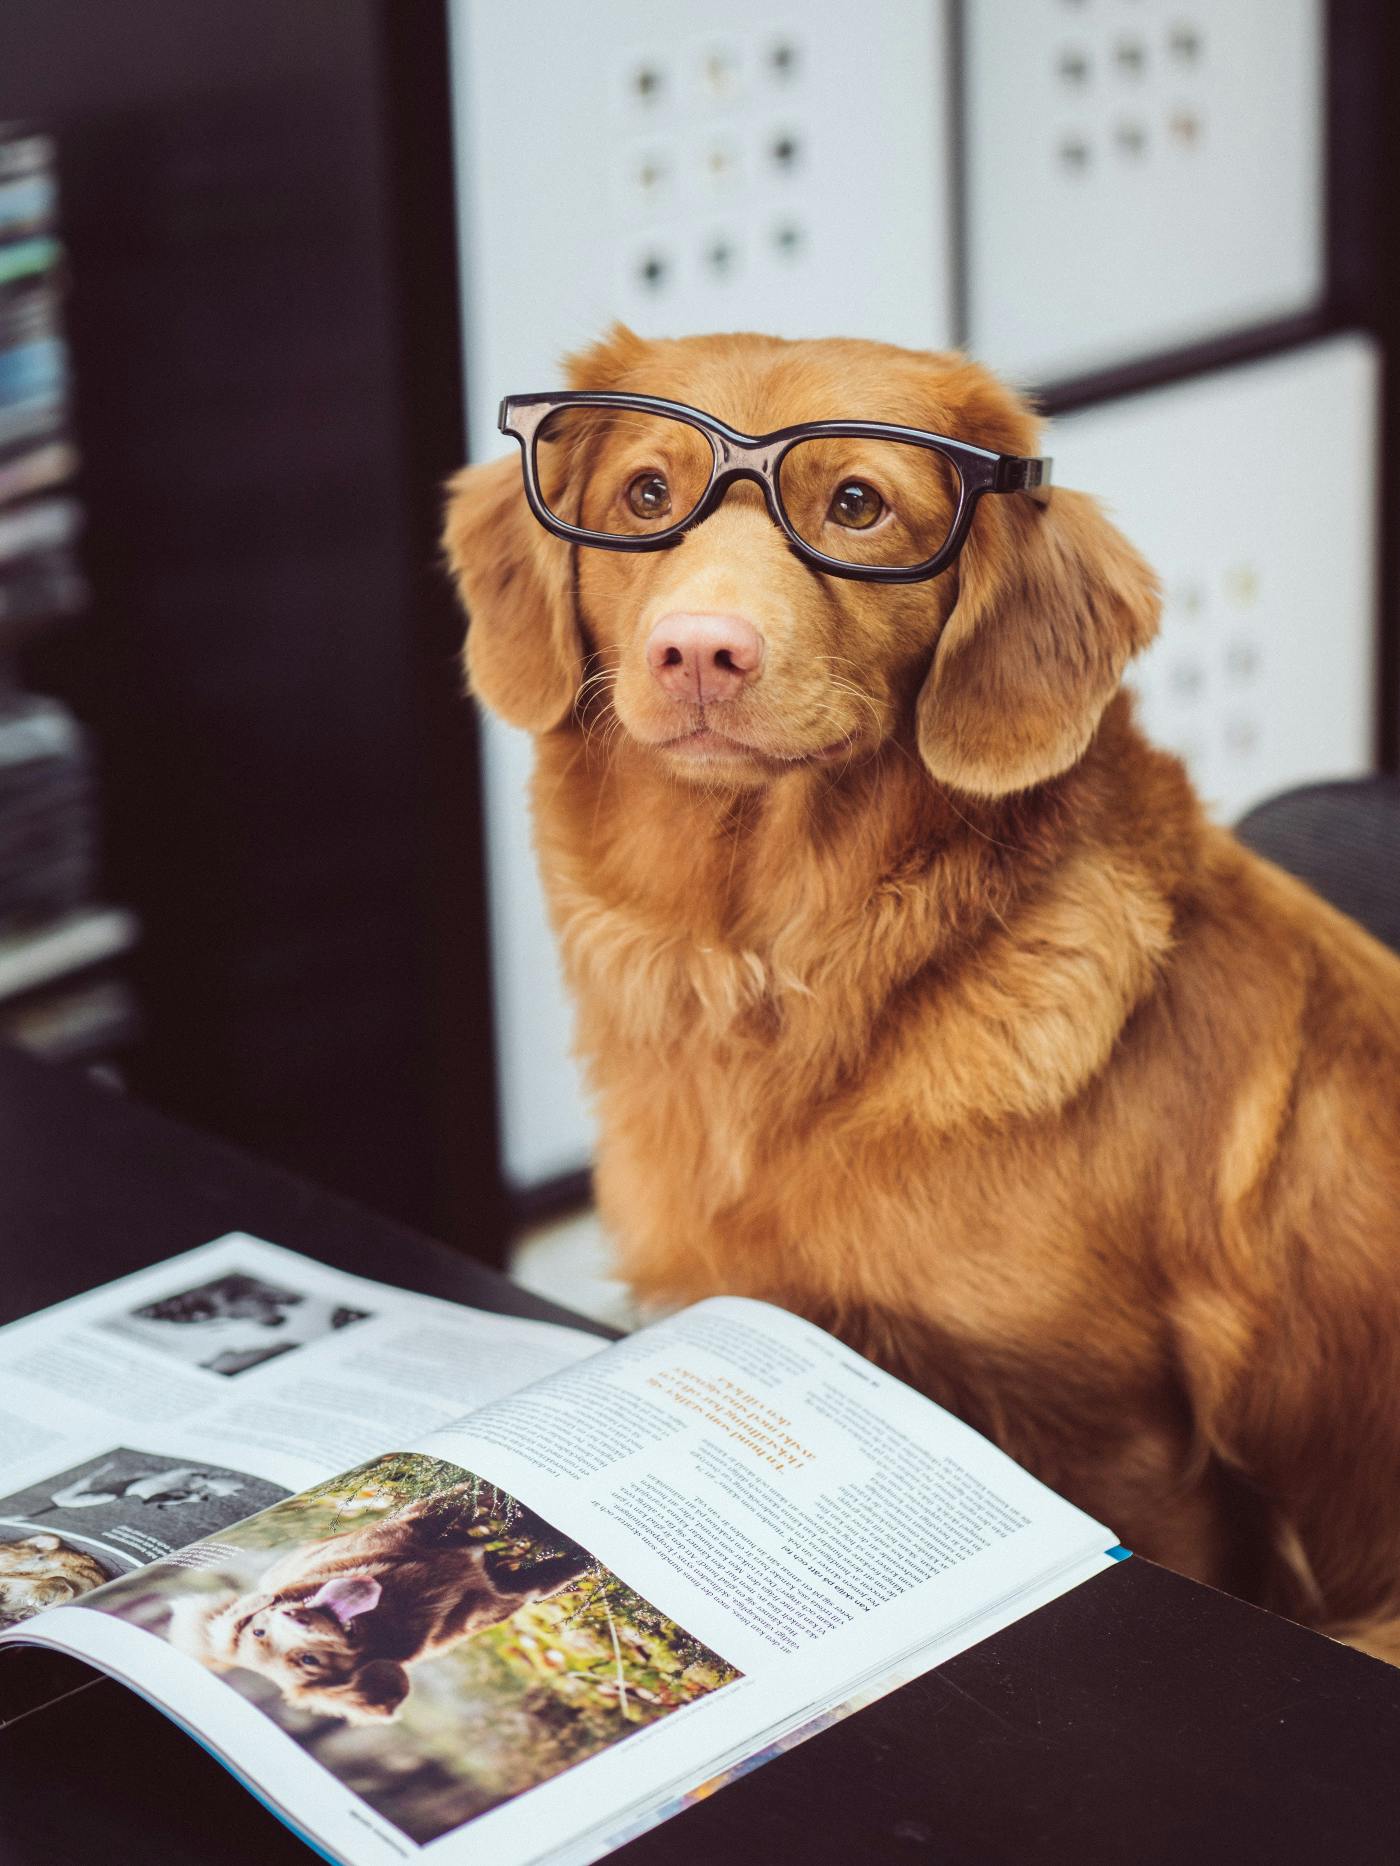 A golden retriever wearing glasses sittign in front of an open book.